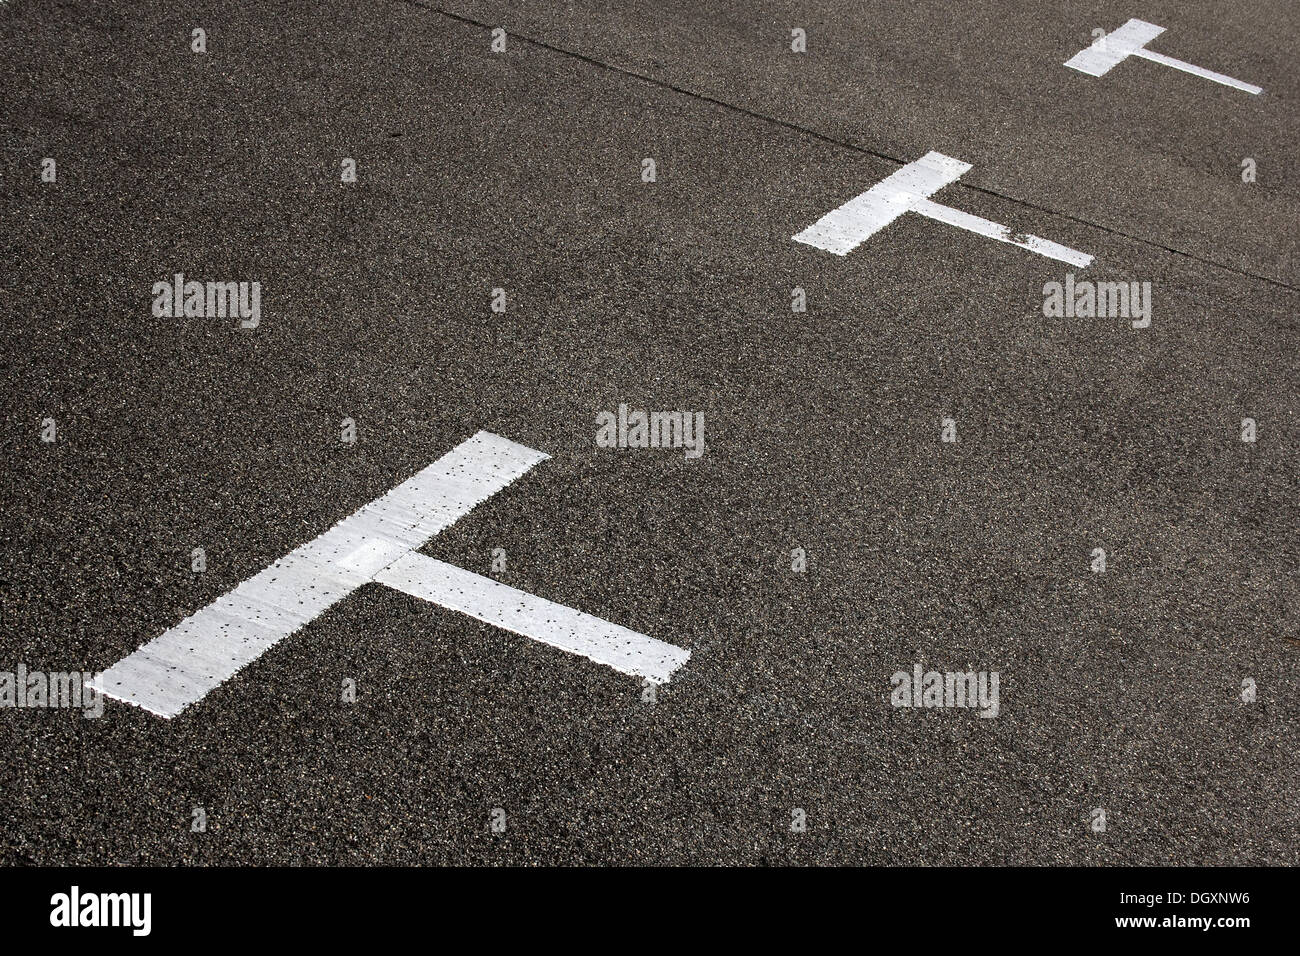 Road markings for parking spaces Stock Photo